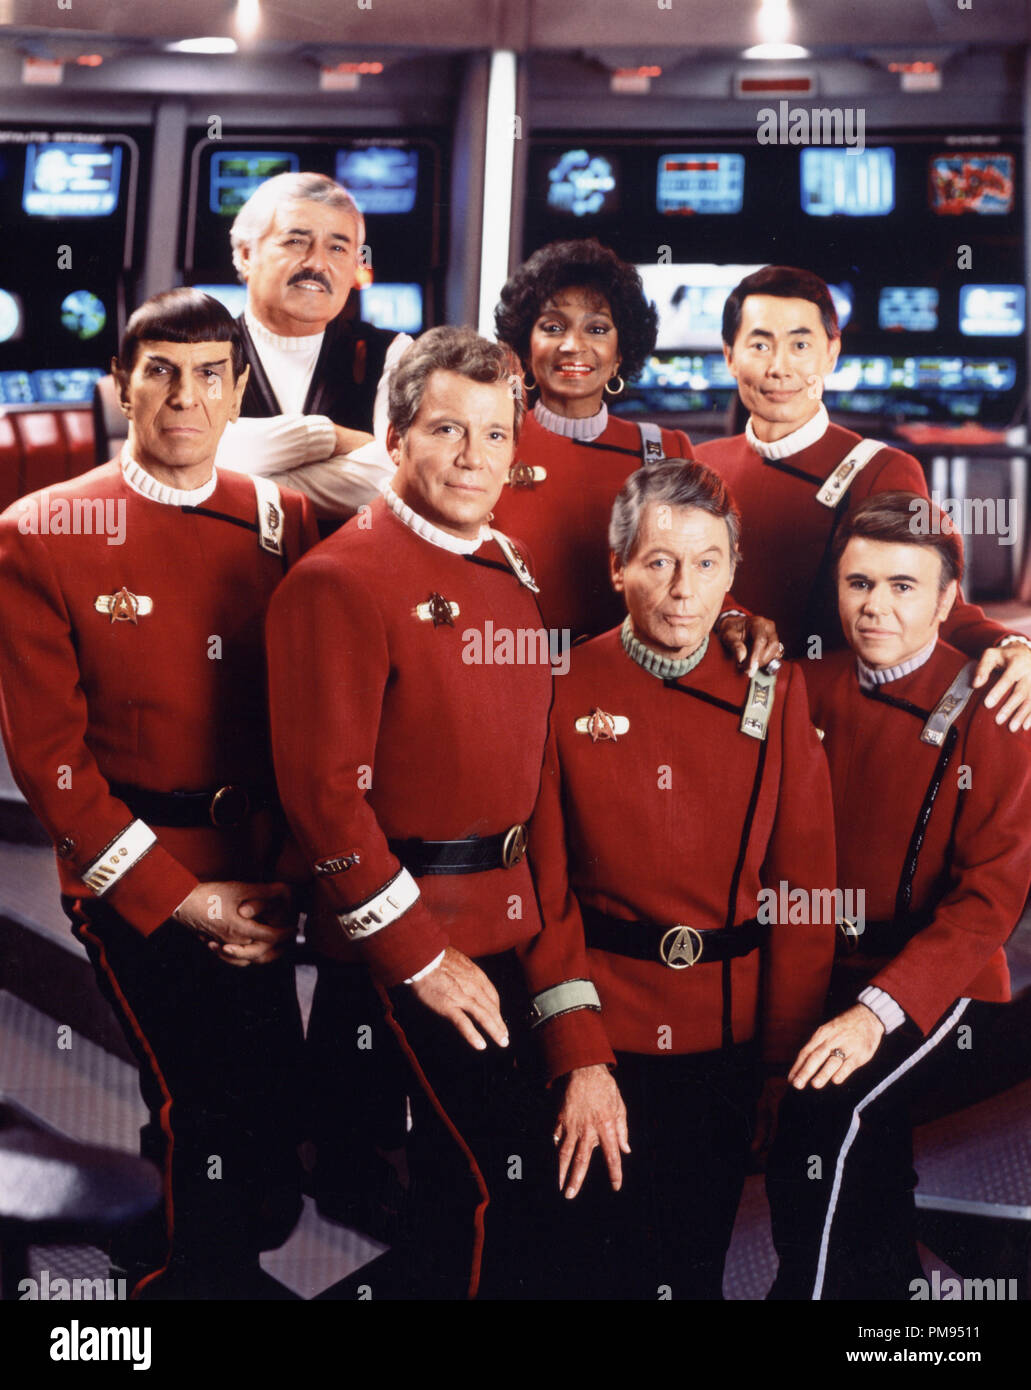 Studio Publicity Still from 'Star Trek IV: The Voyage Home' Leonard Nimoy, James Doohan, William Shatner, Nichelle Nichols, DeForest Kelley, George Takei, Walter Koenig © 1986 Paramount  All Rights Reserved   File Reference # 31700085THA  For Editorial Use Only Stock Photo